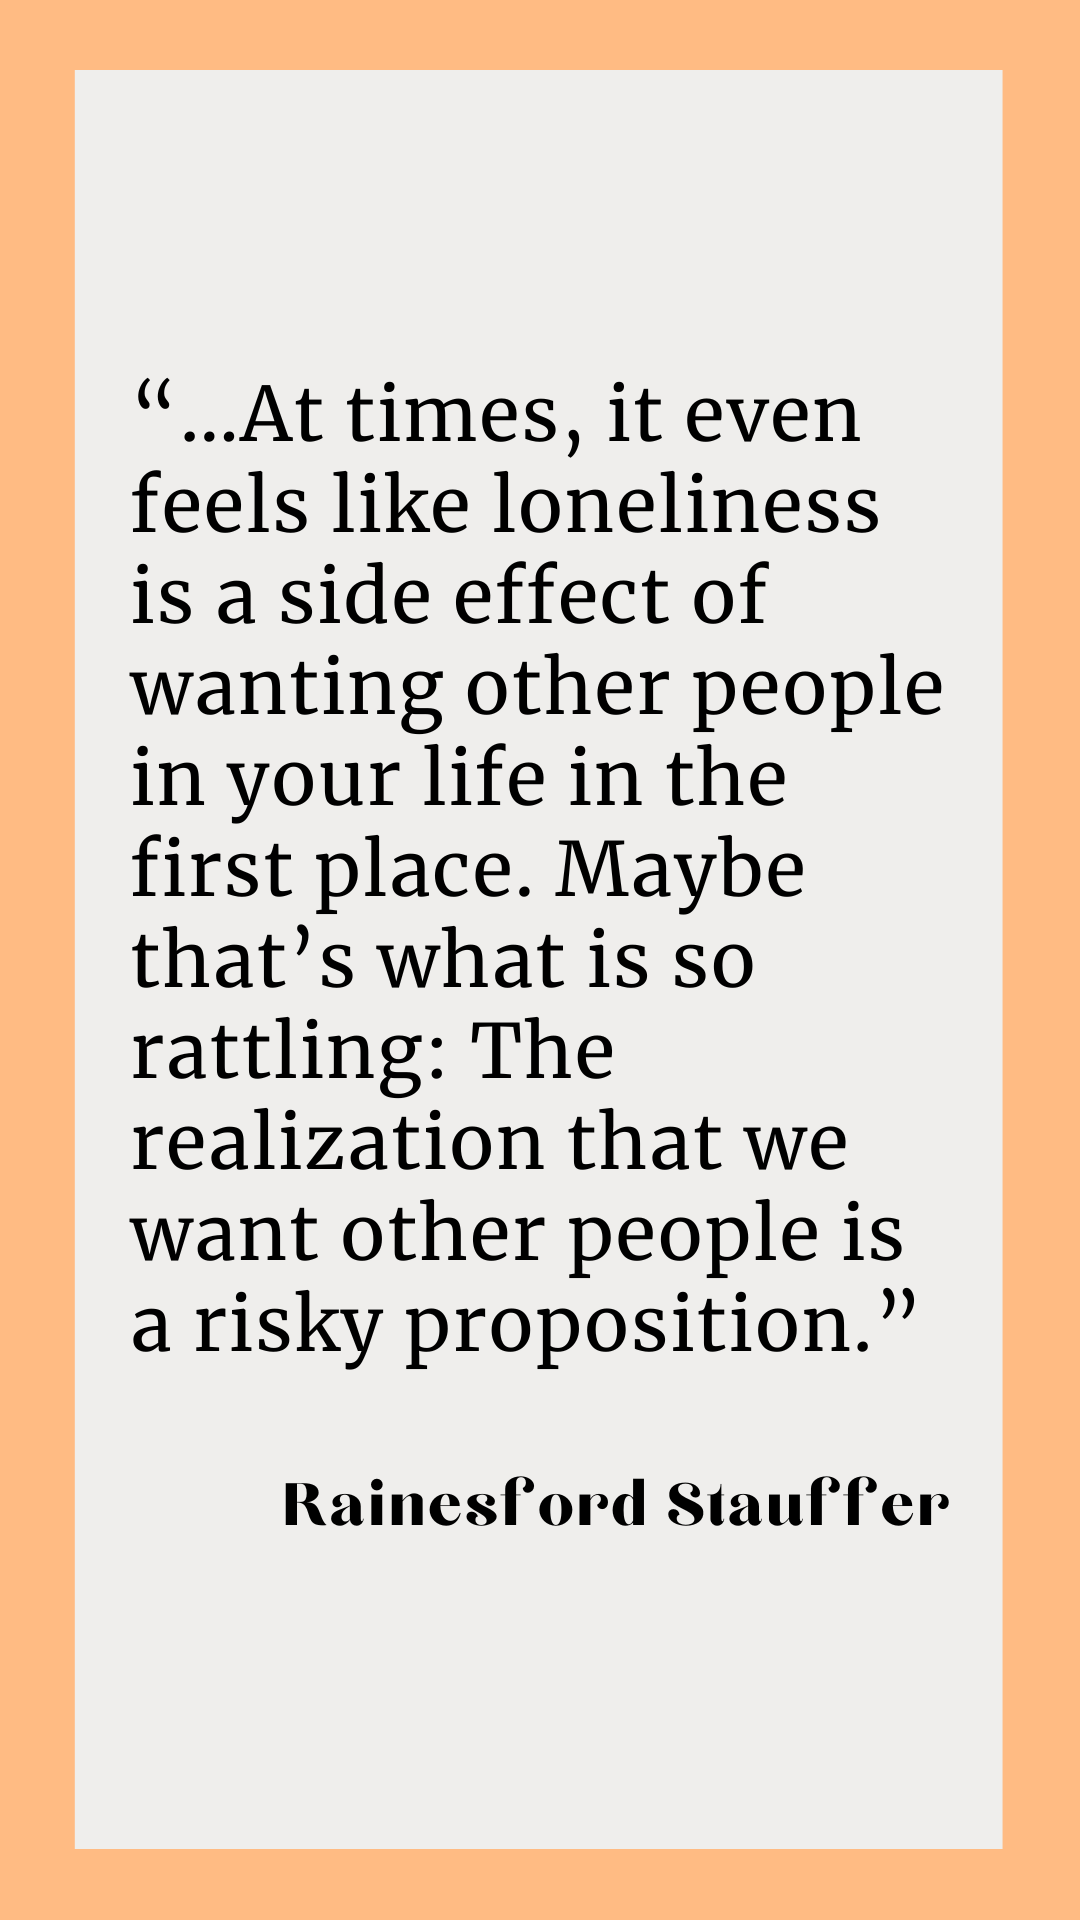 ”At times, it even feels like loneliness is a side effect of wanting other people in your life in the first place. Maybe that’s what is so rattling: The realization that we want other people is a risky proposition,” said Rainesford Stauffer.